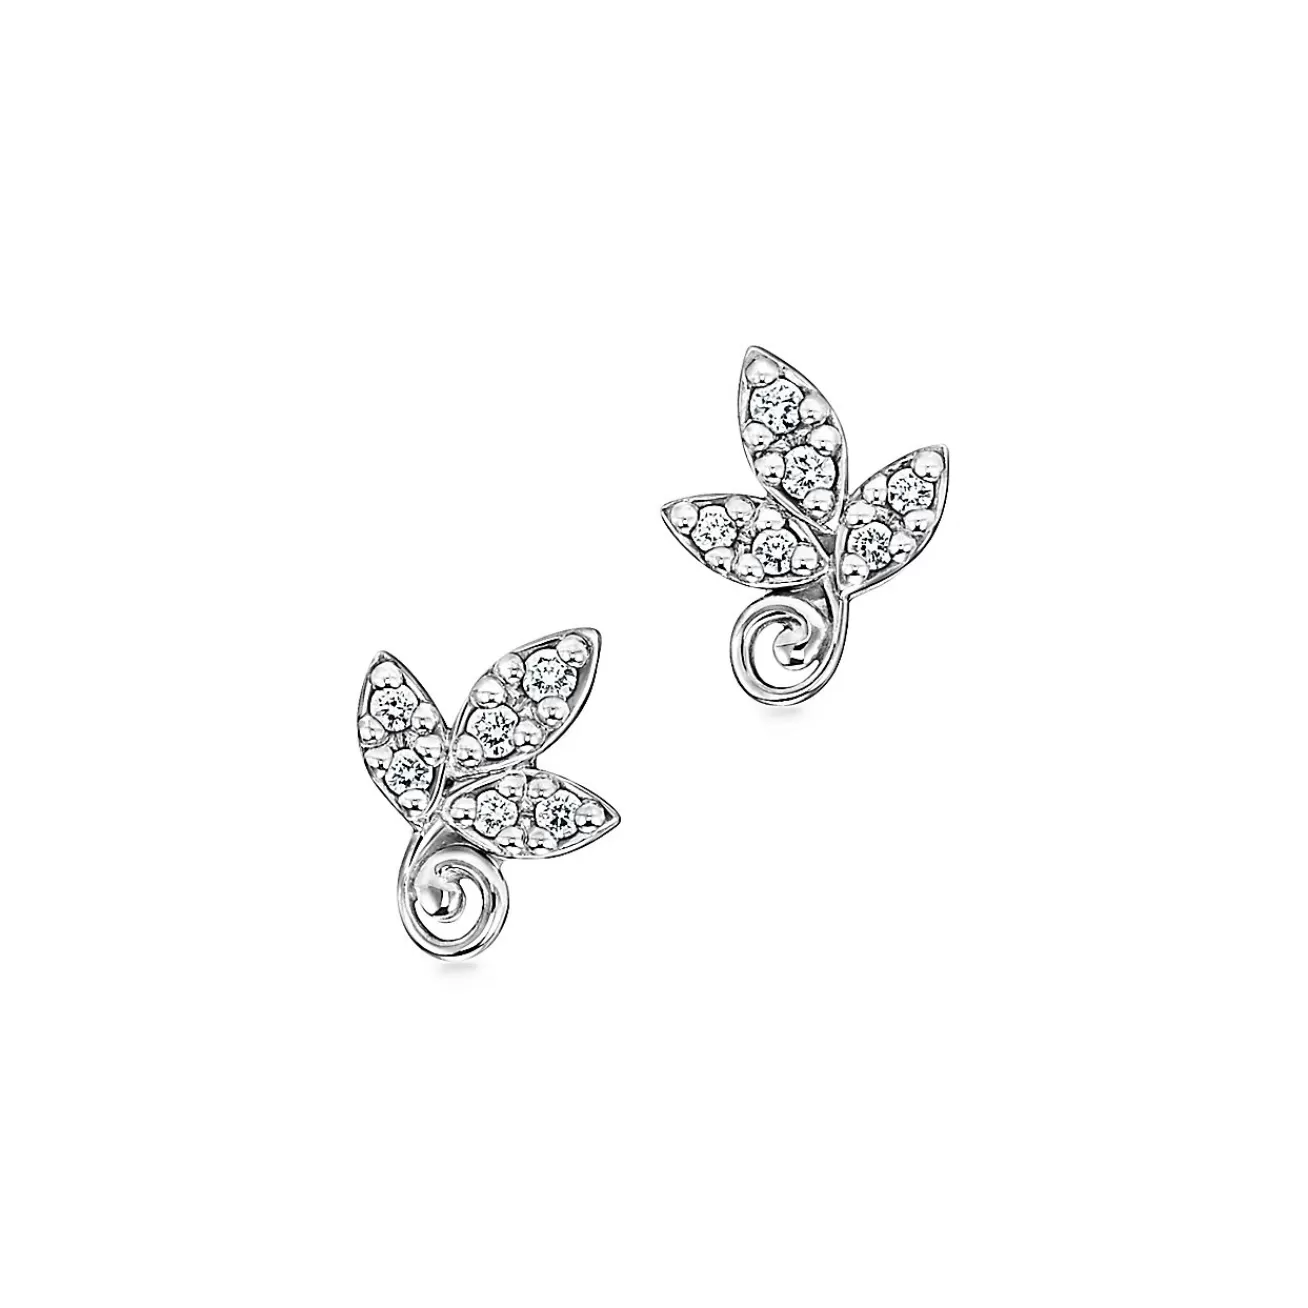 Tiffany & Co. Paloma Picasso® Olive Leaf earrings in 18k white gold with diamonds. | ^ Earrings | Diamond Jewelry